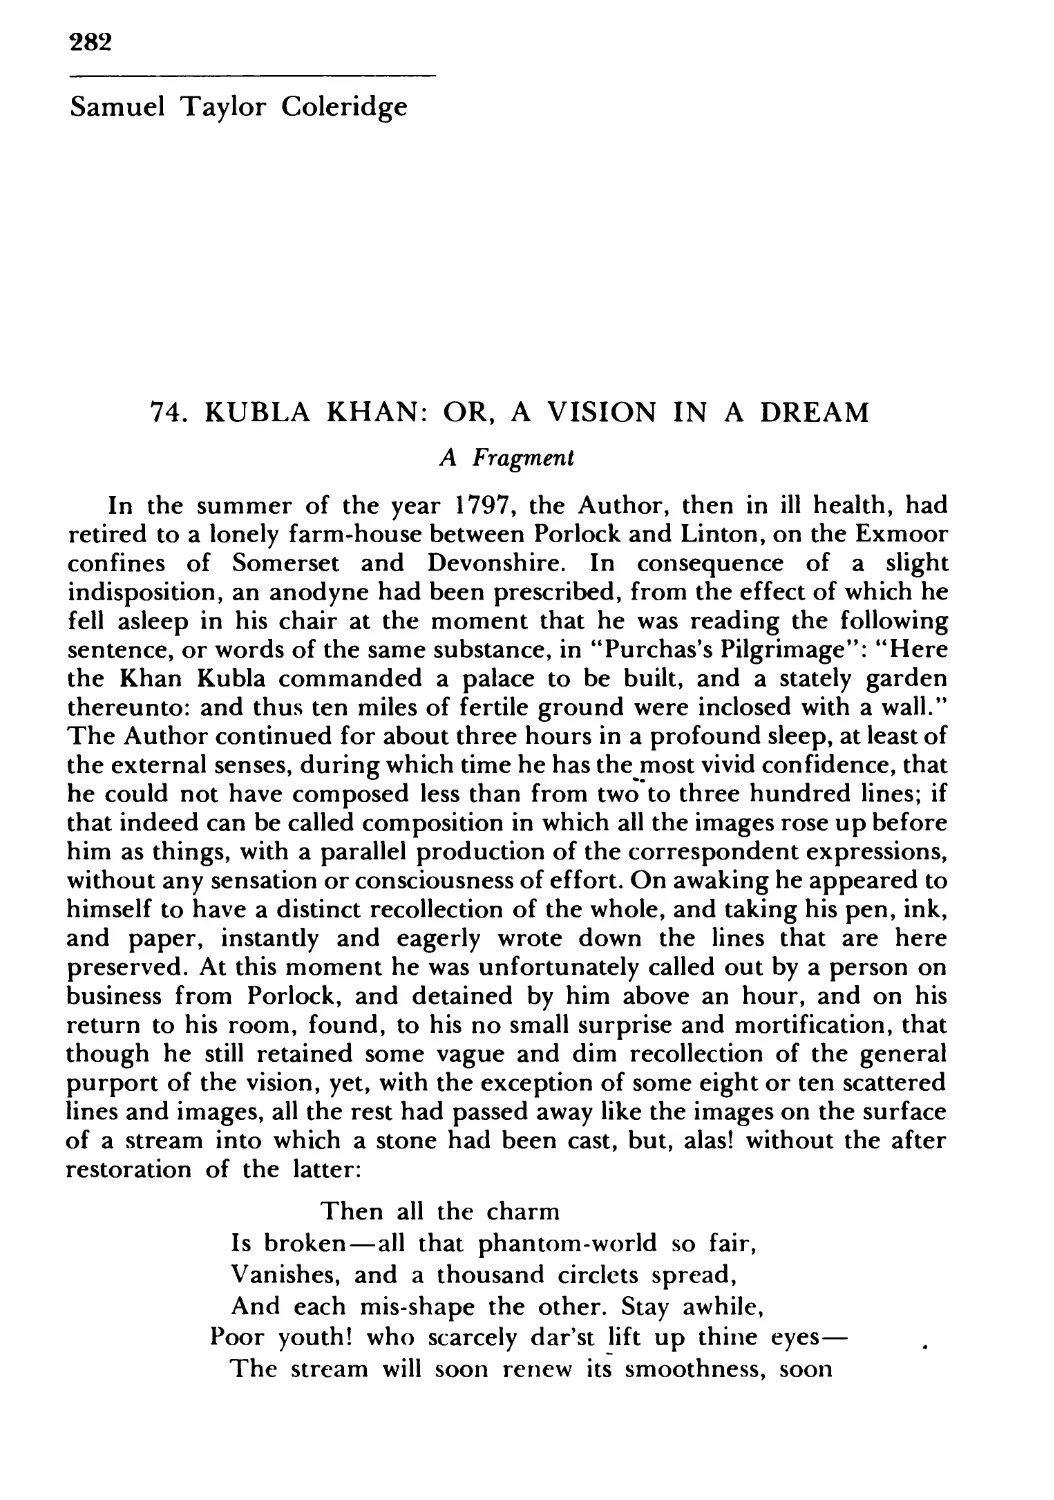 74. Kubla Khan: or, A Vision in a Dream. A Fragment